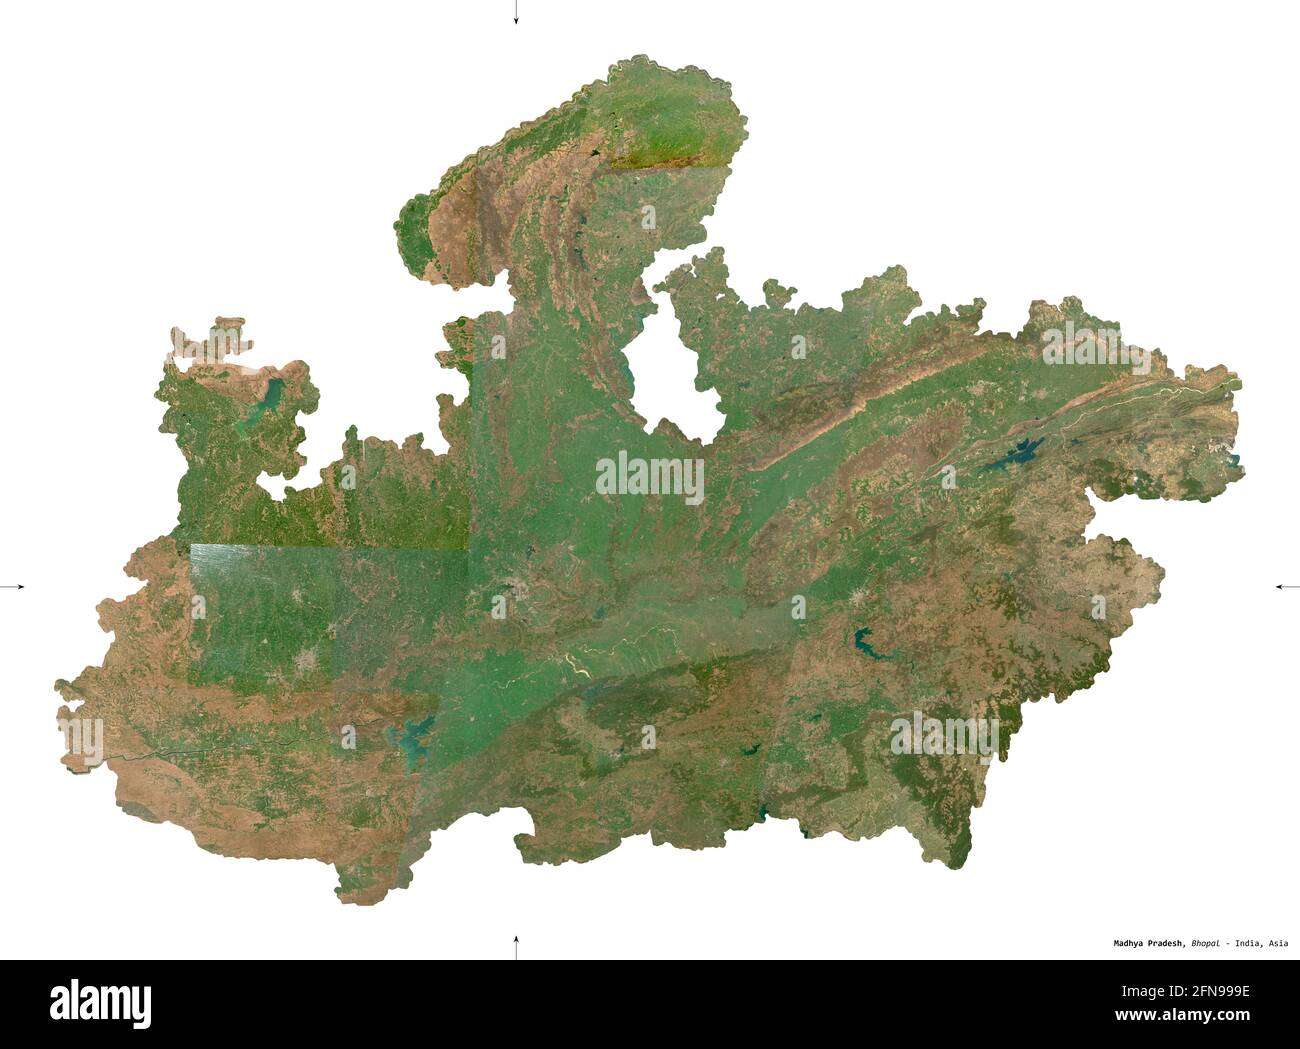 Madhya Pradesh, state of India. Sentinel-2 satellite imagery. Shape isolated on white. Description, location of the capital. Contains modified Coperni Stock Photo